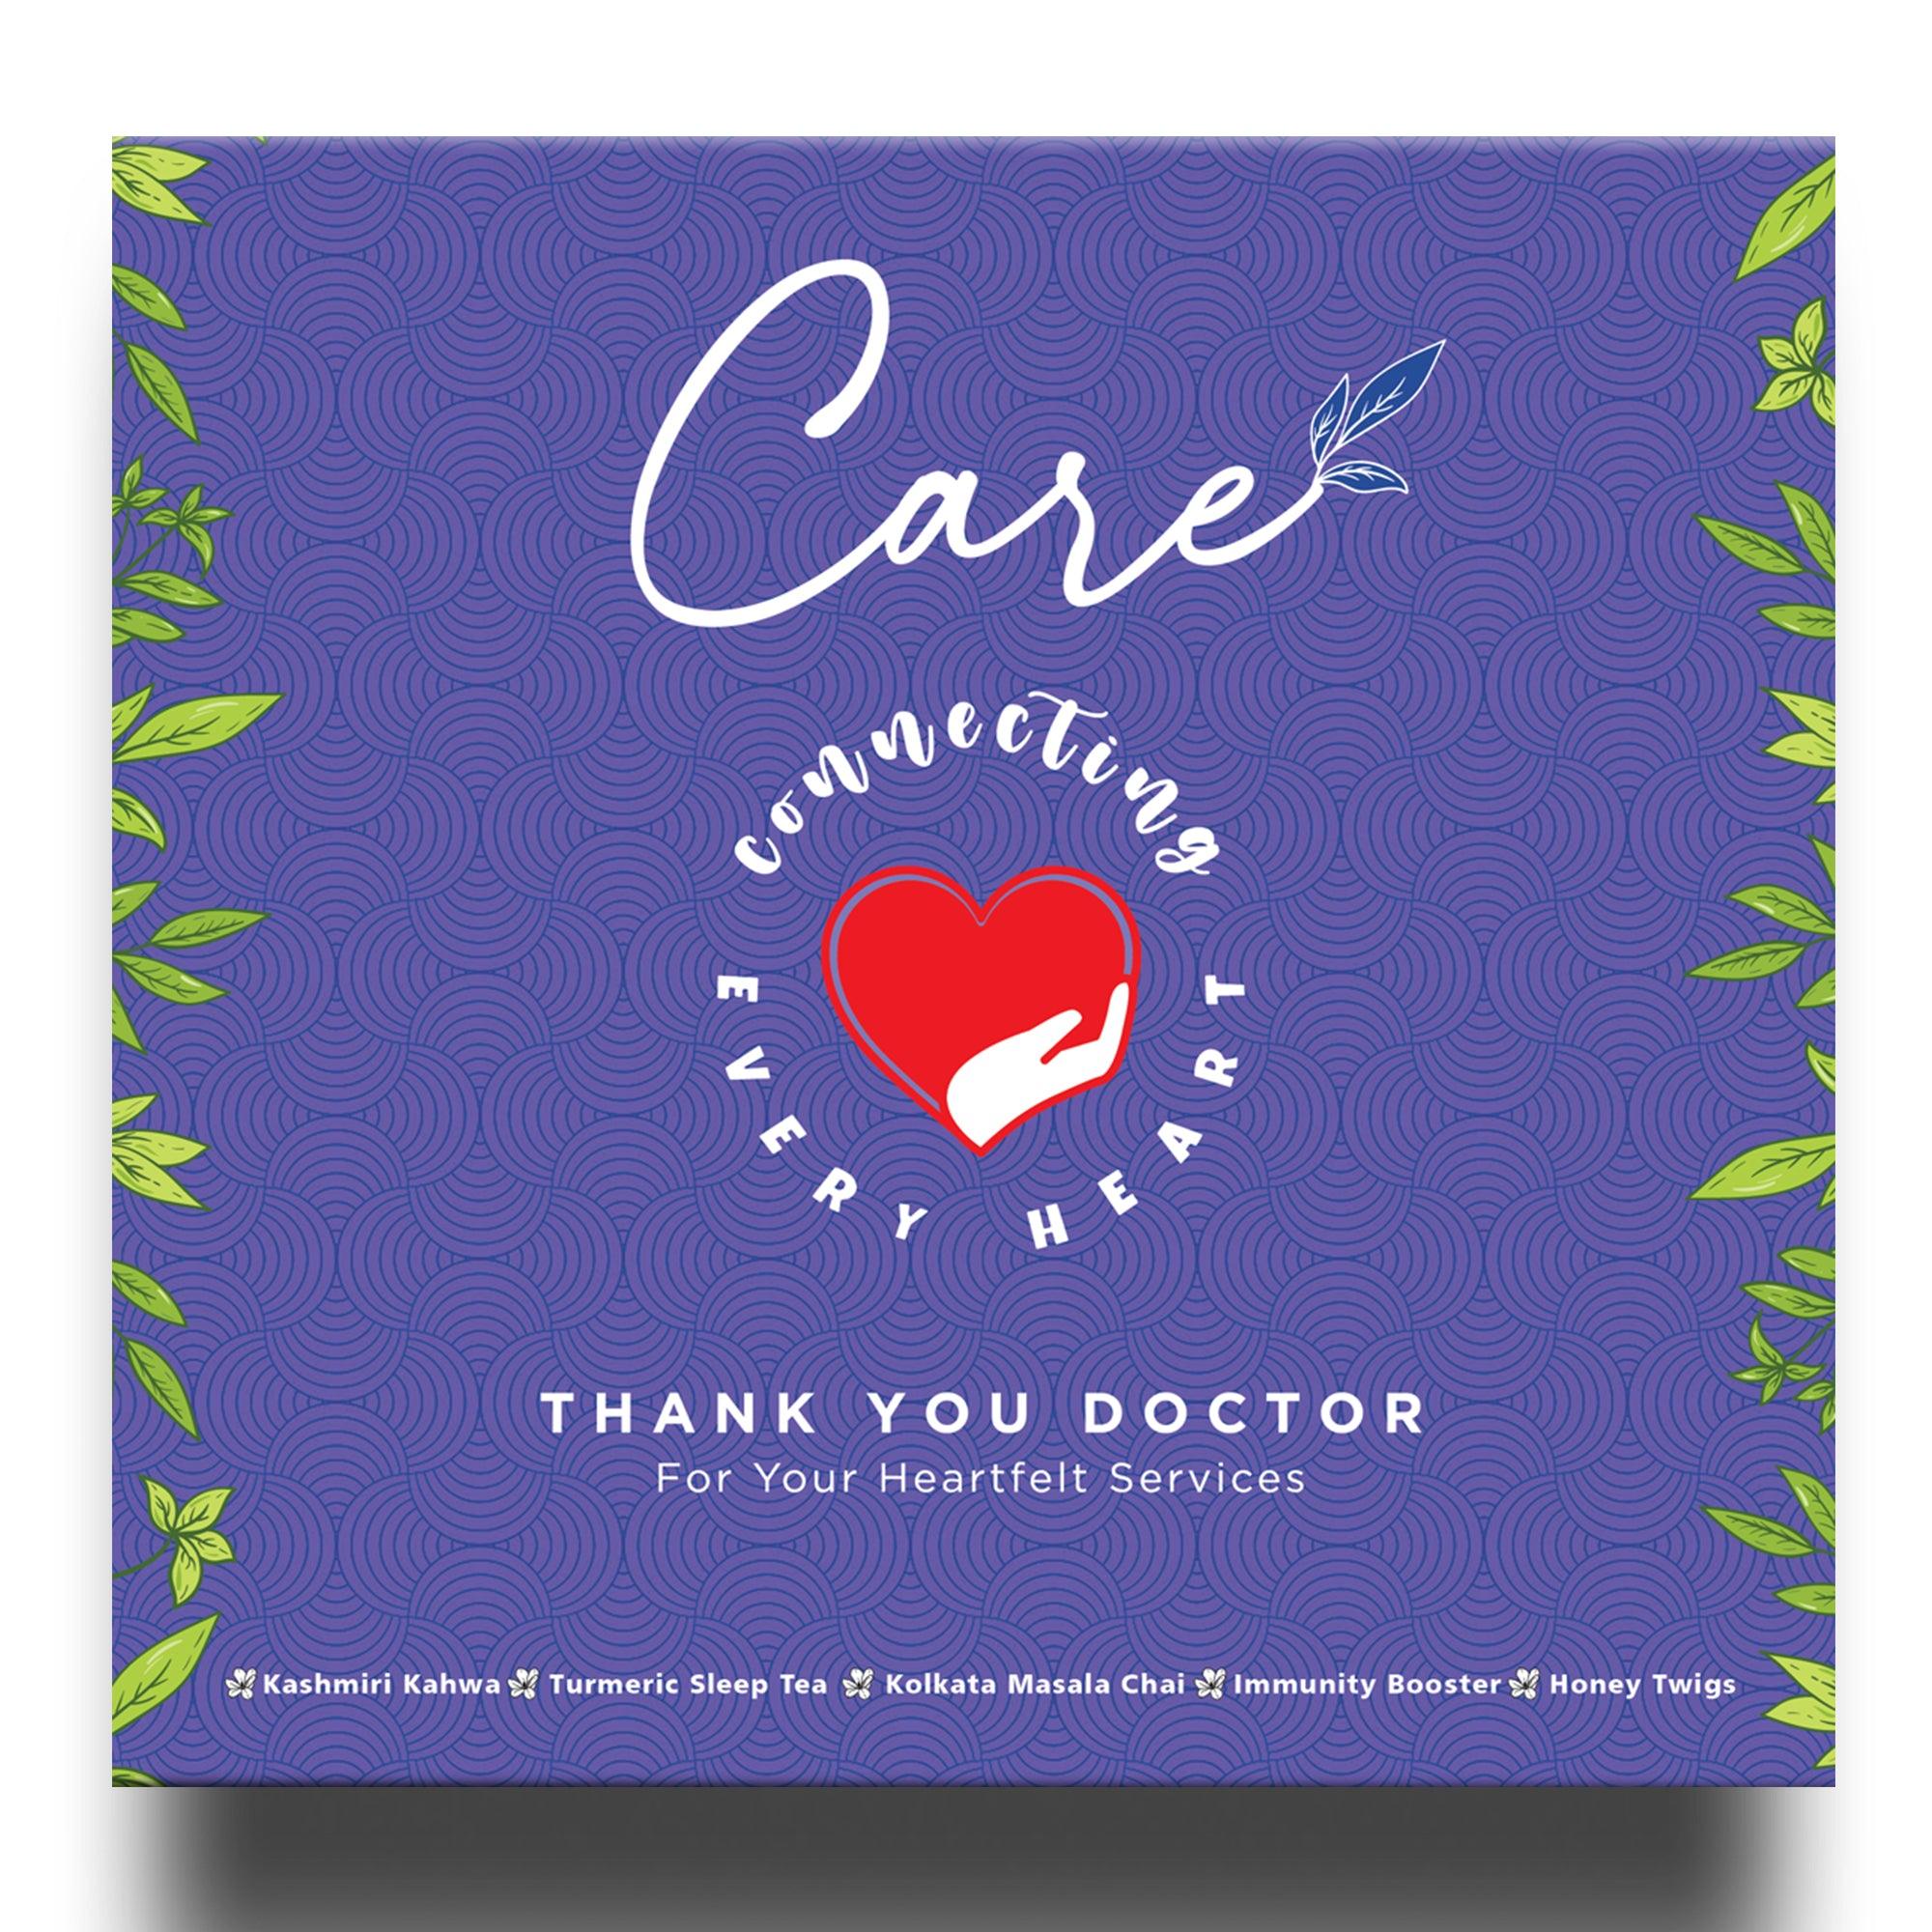 Care (Purple) Great Gift for Doctors - Tearaja